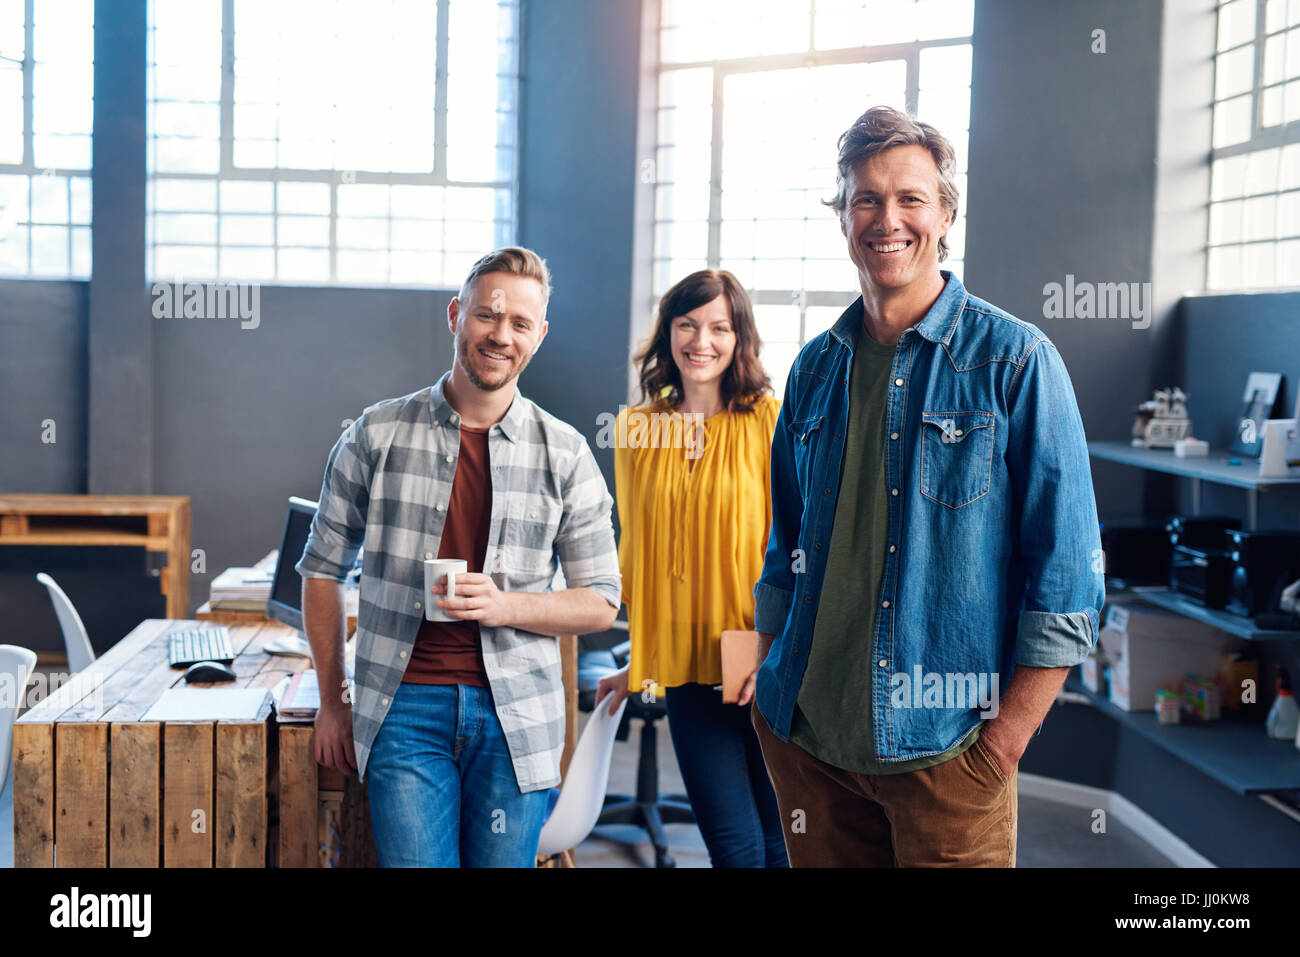 Smiling young coworkers standing together in a modern office Stock Photo